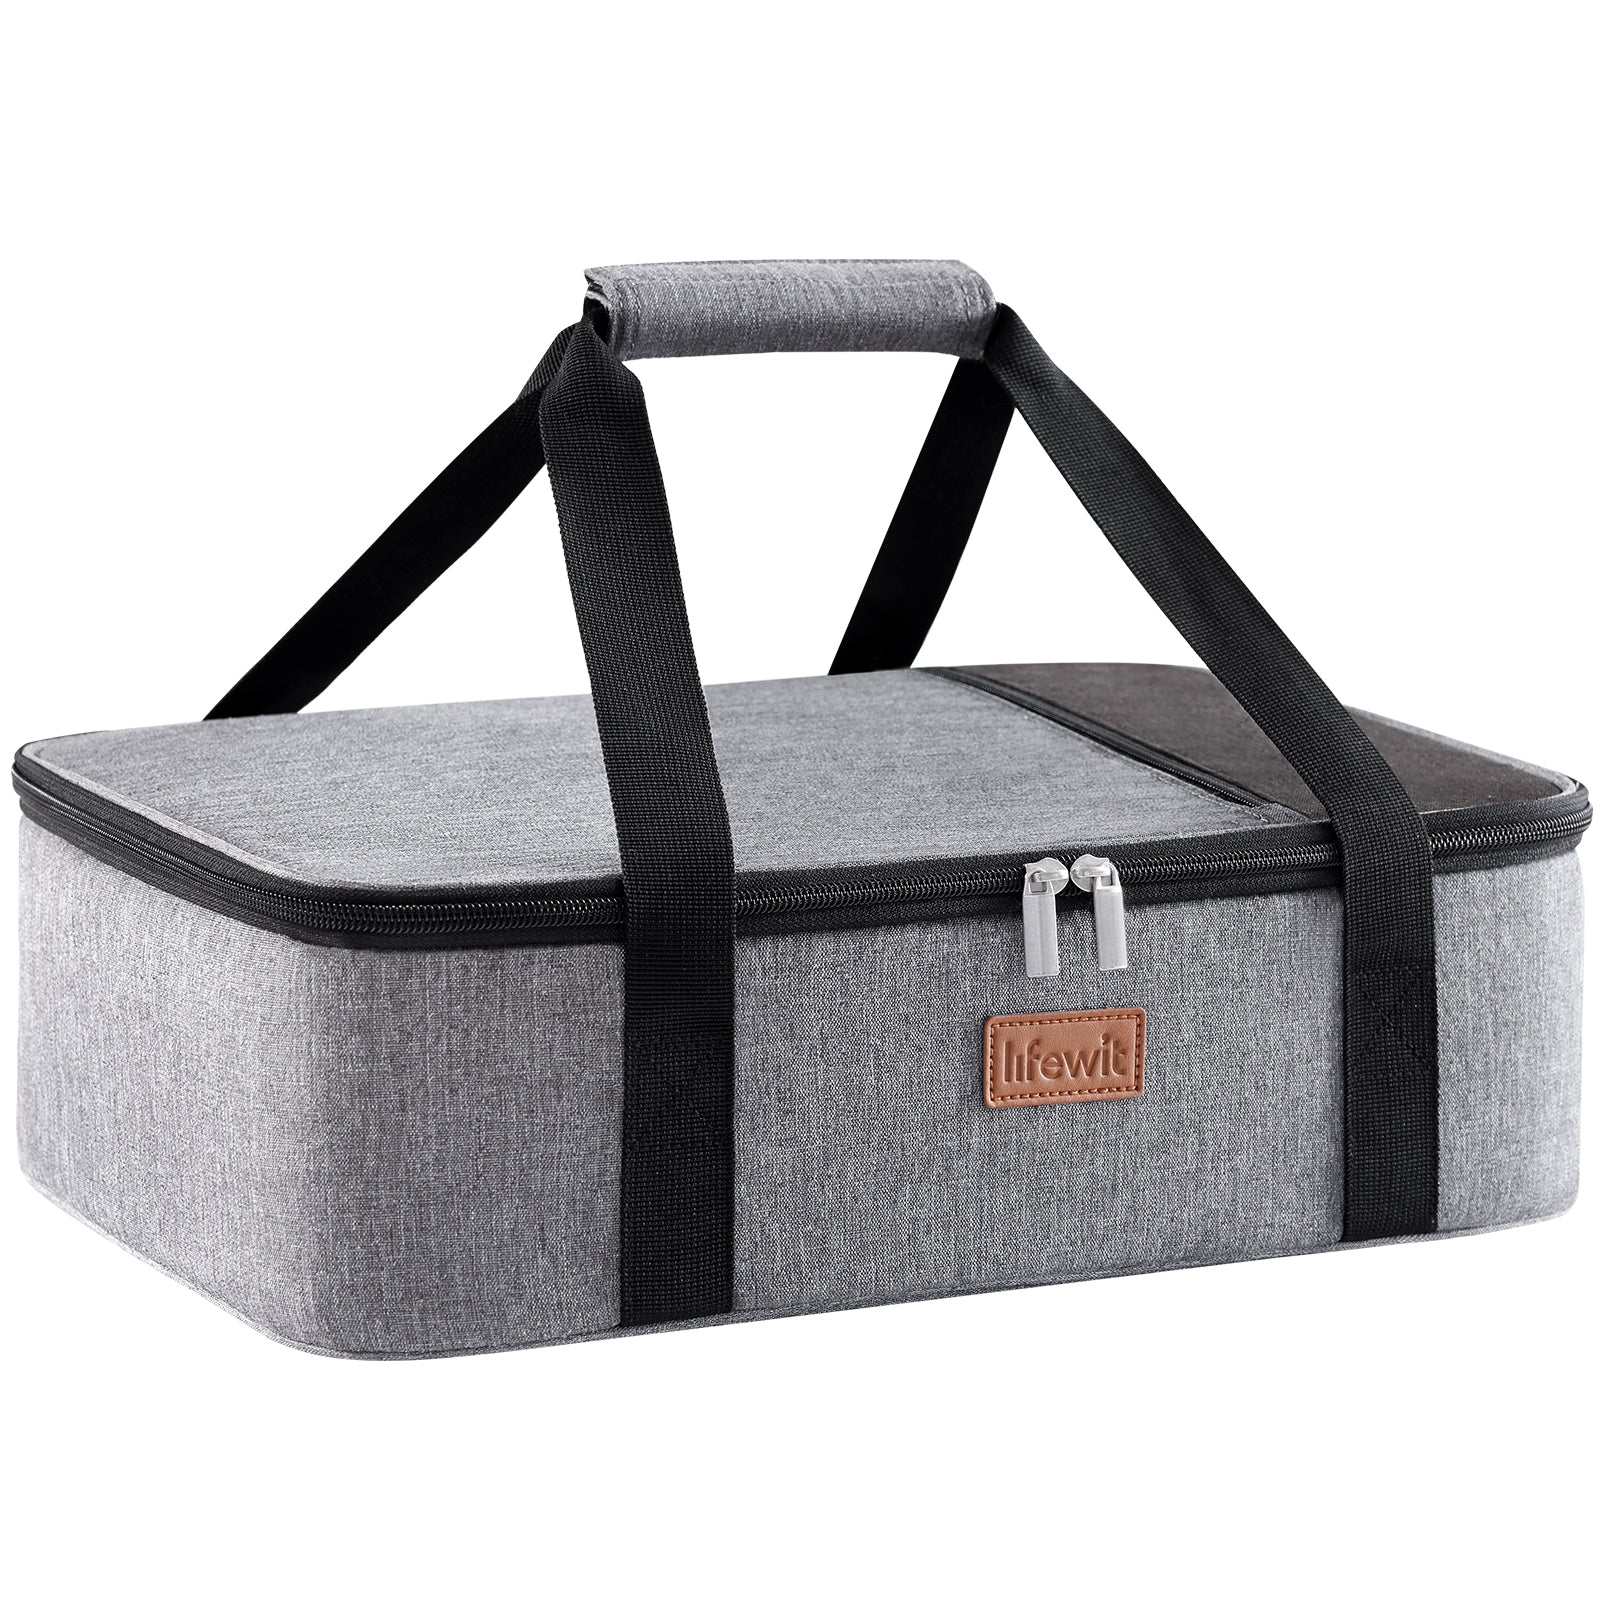 Insulated Casserole Dish With Lid Carrier - Lifewit – Lifewitstore